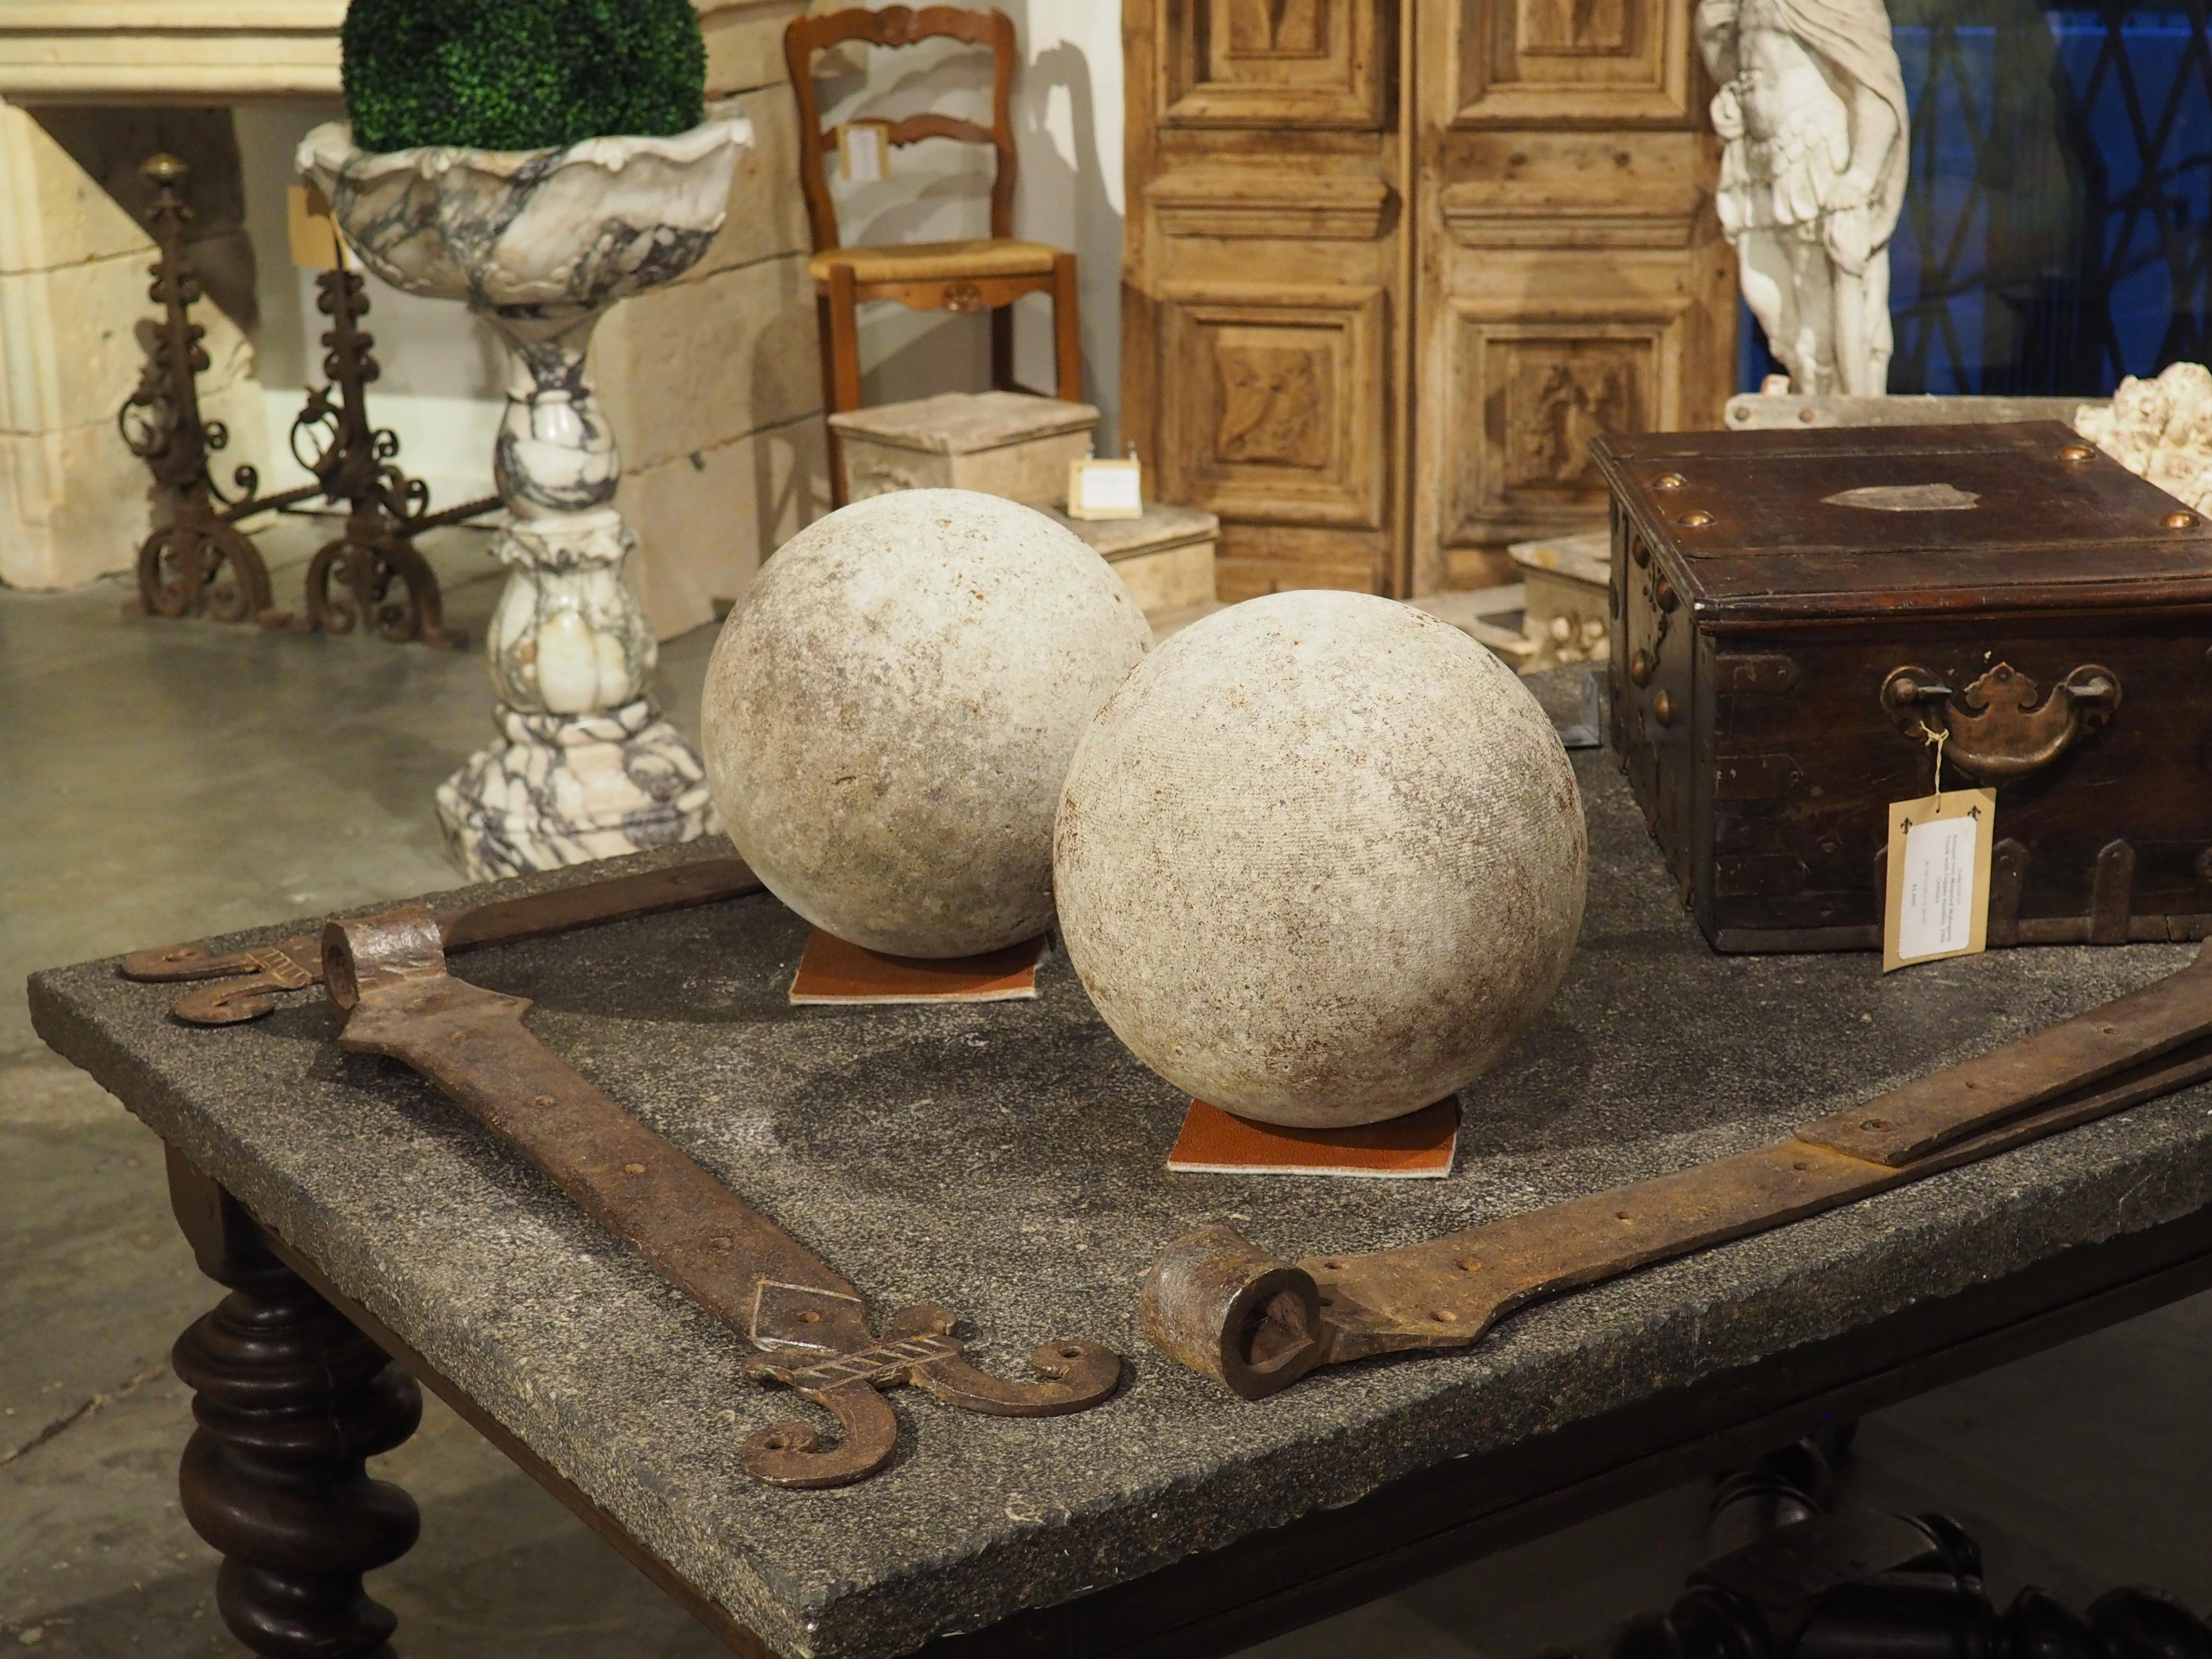 This decorative pair of garden spheres were carved from solid blocks of Italian limestone. The stones are dotted with brown lichen and green moss buildup, adding character to the nice gray patina.

The limestone garden spheres are highly versatile